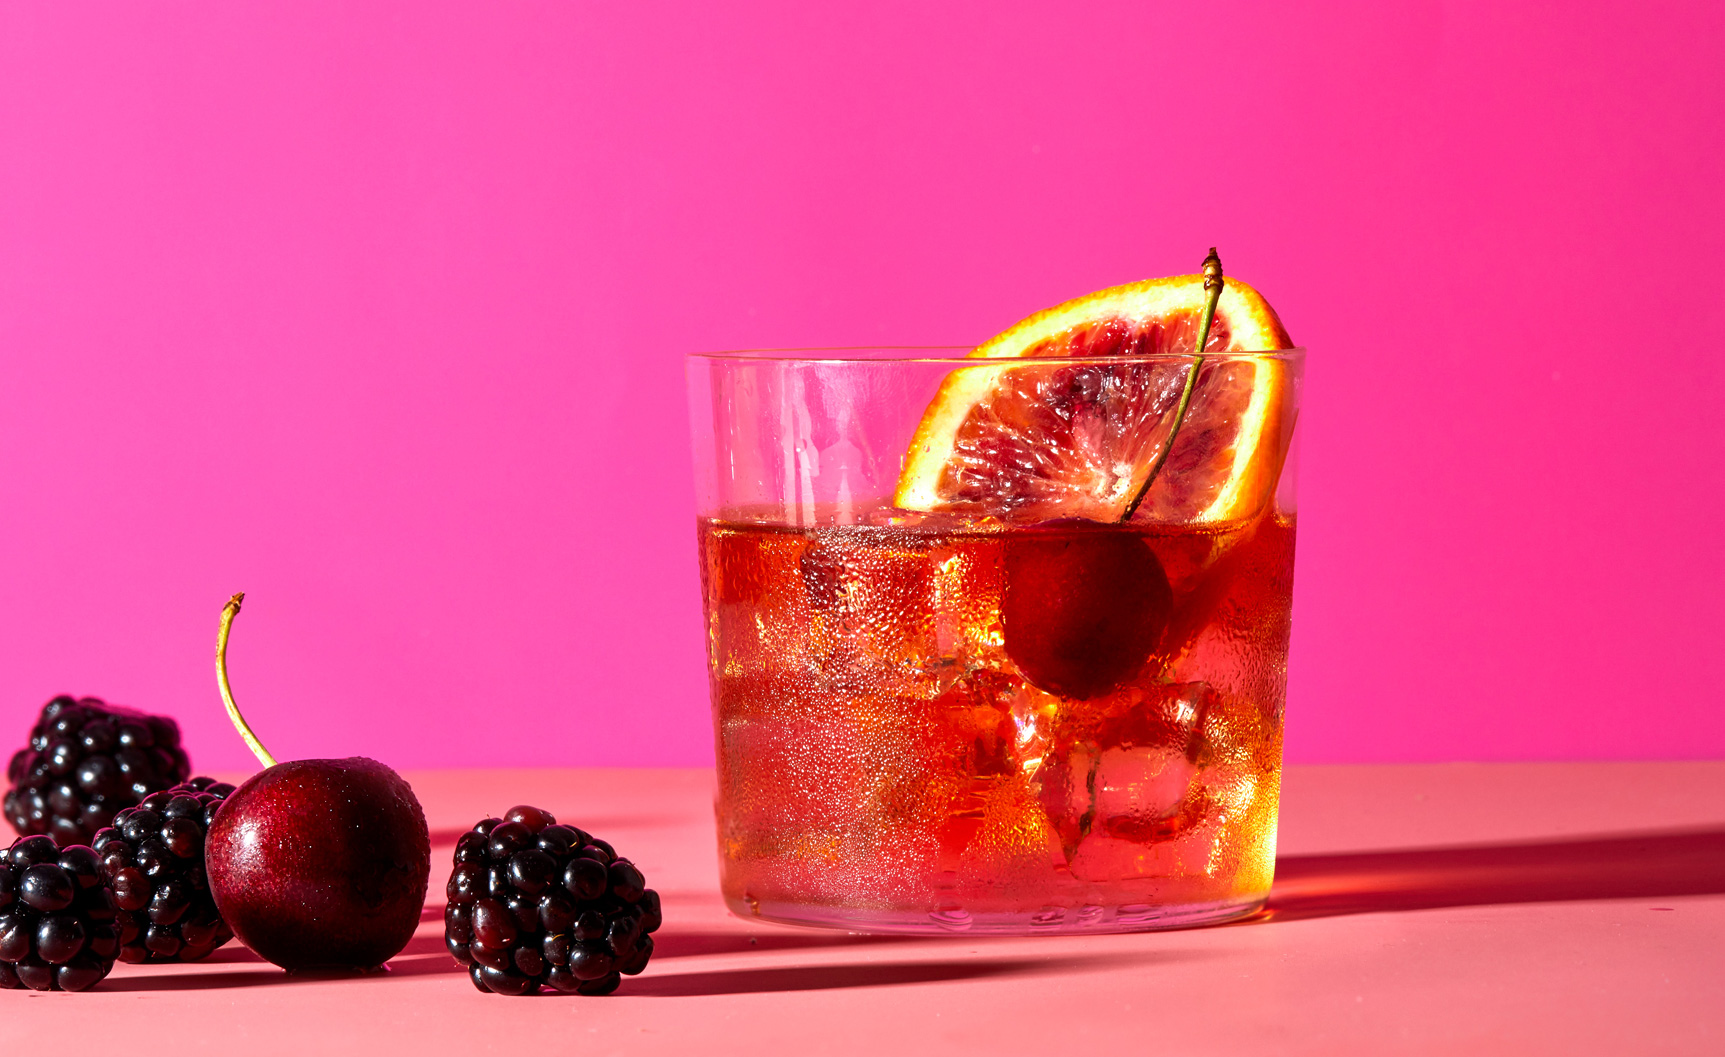 Whiskey cocktail in front of bright colorful pink background with fresh berries garnish.